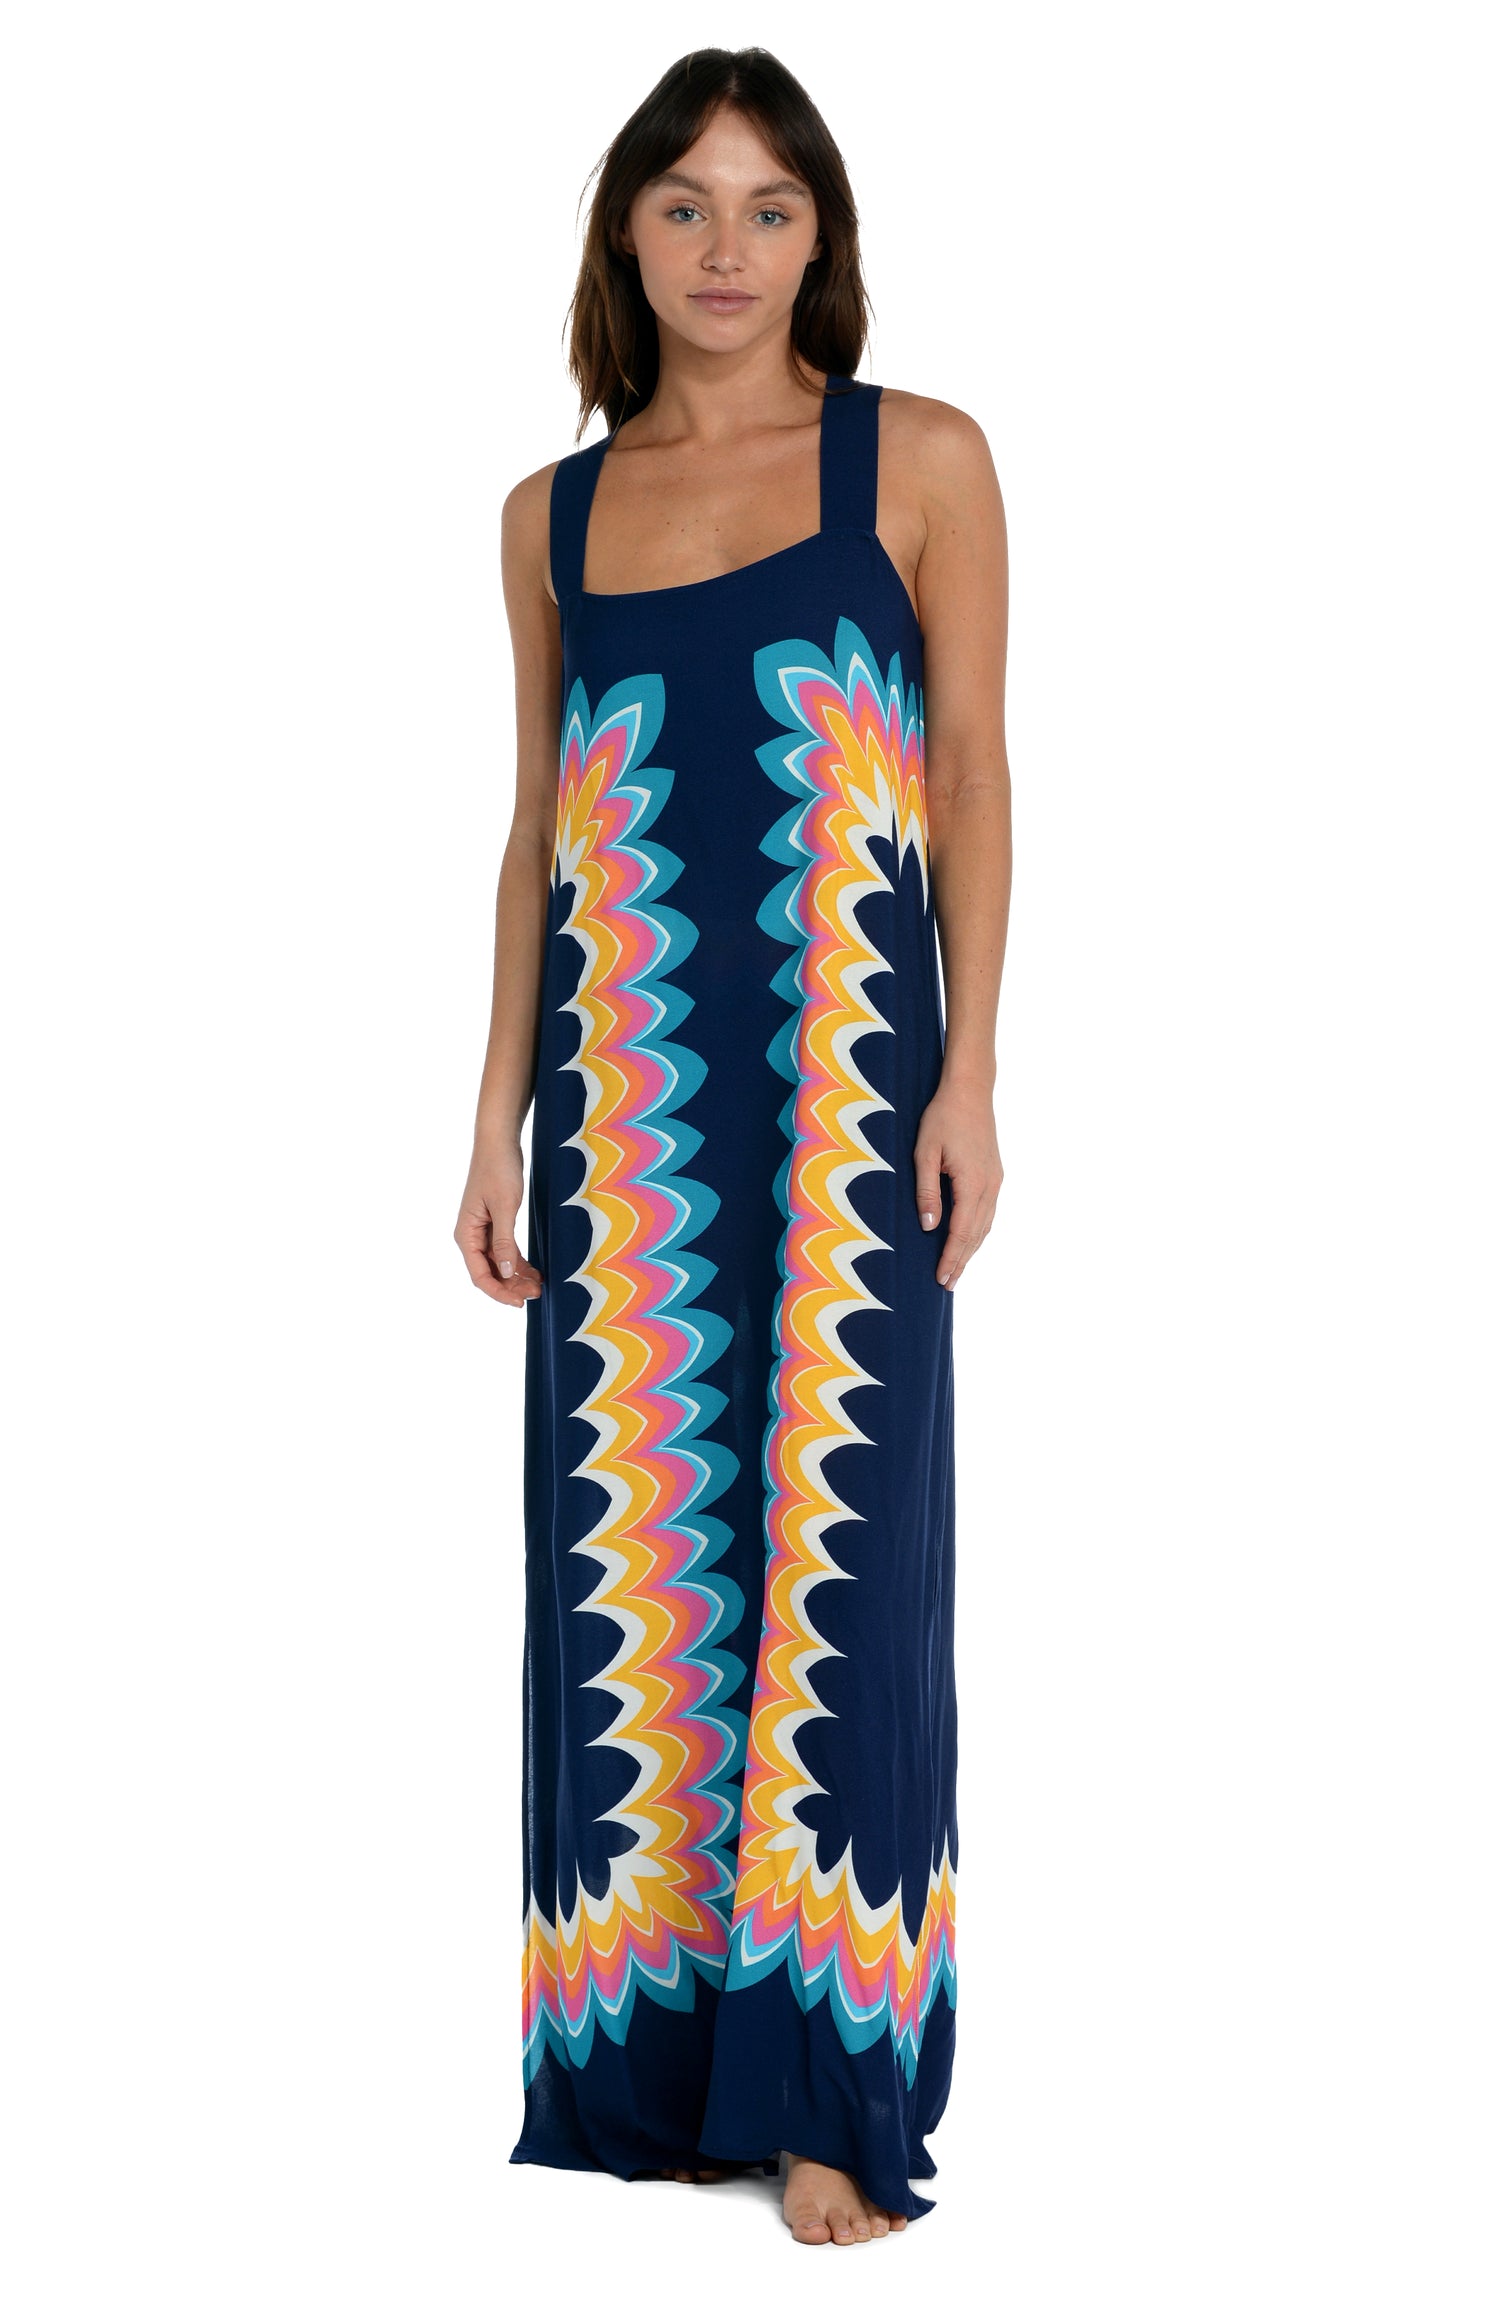 Model is wearing a navy multicolored geometric printed maxi dress cover up from our New Wave collection.